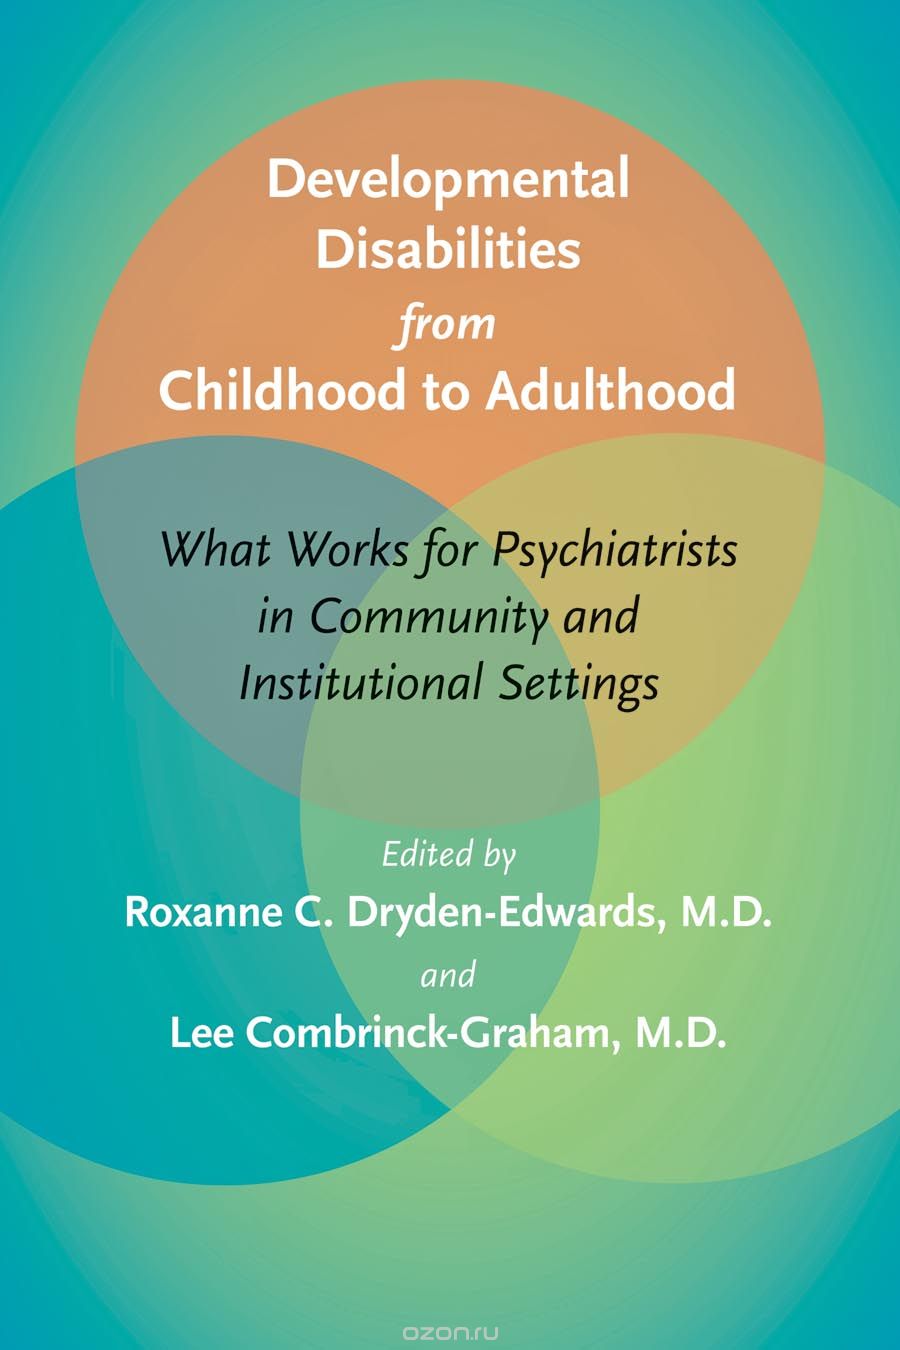 Developmental Disabilities from Childhood to Adulthood – What Works for Psychiatrists in Community and Institutional Settings